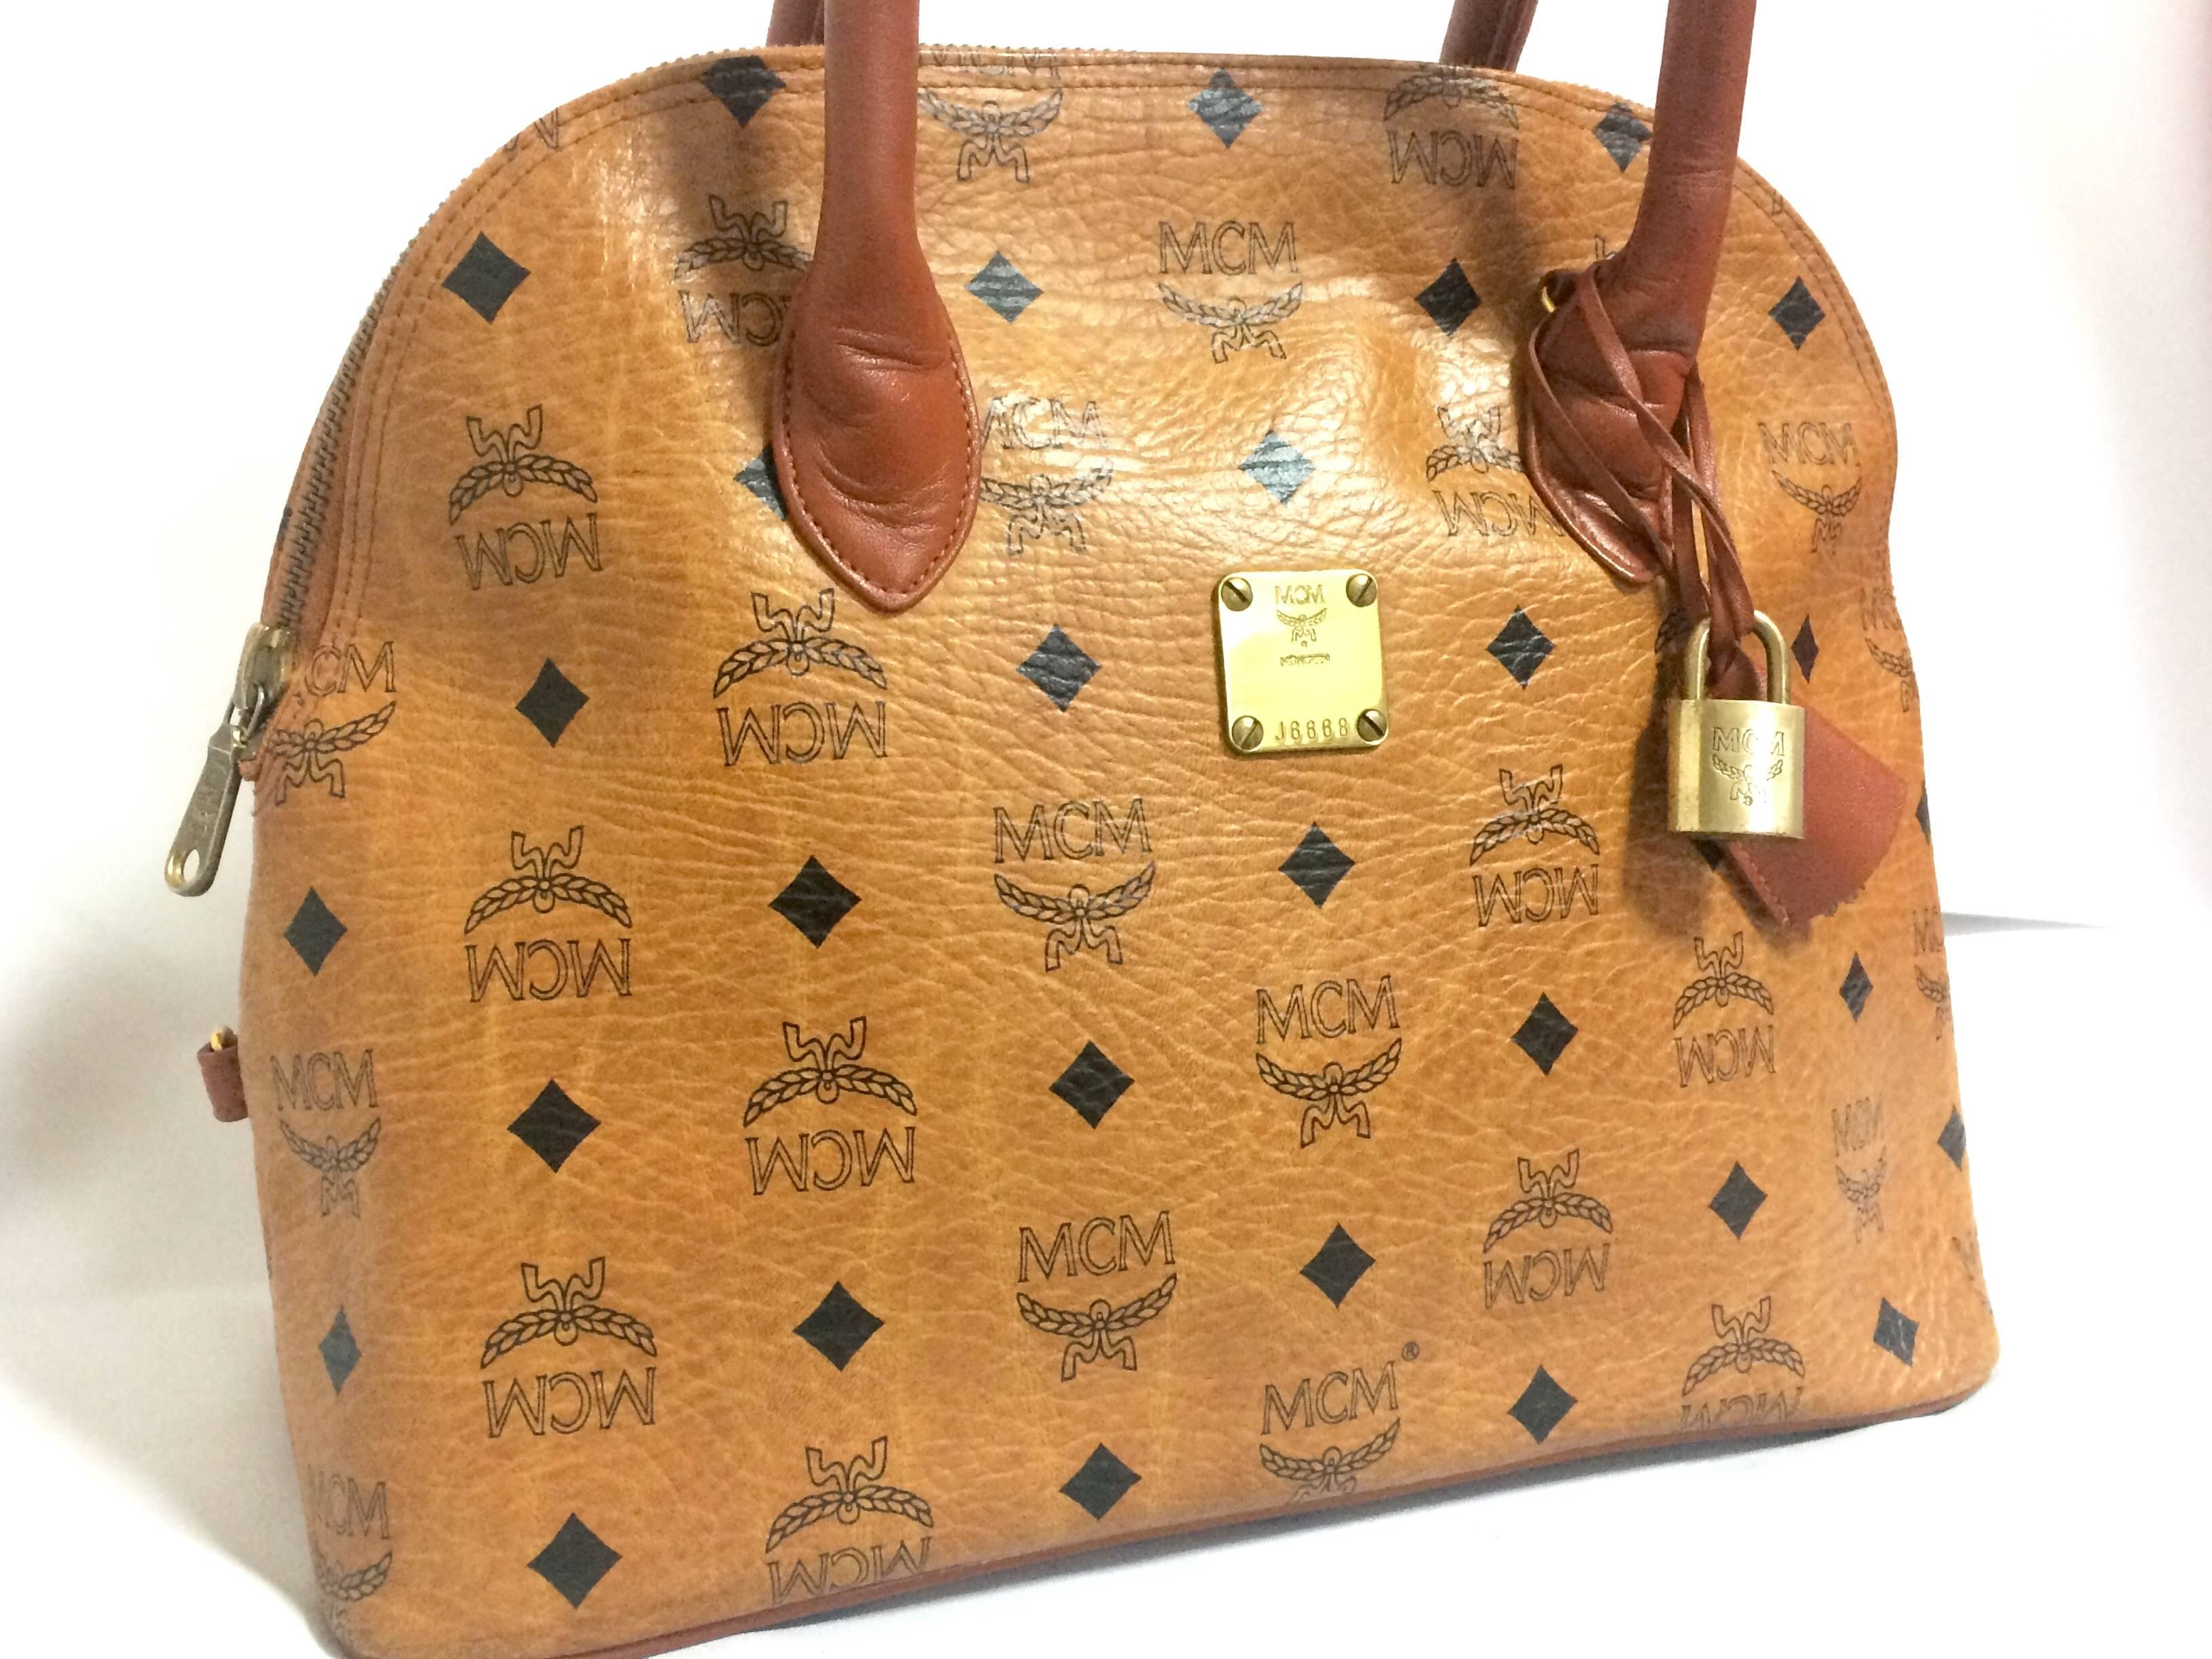 1990s. Vintage MCM classic brown monogram handbag in bolide design. Classic bag designed by Michael Cromer. Handmade in Germany.

MCM has been back in the fashion trend again!!
Now it's considered to be one of the must-have designer in